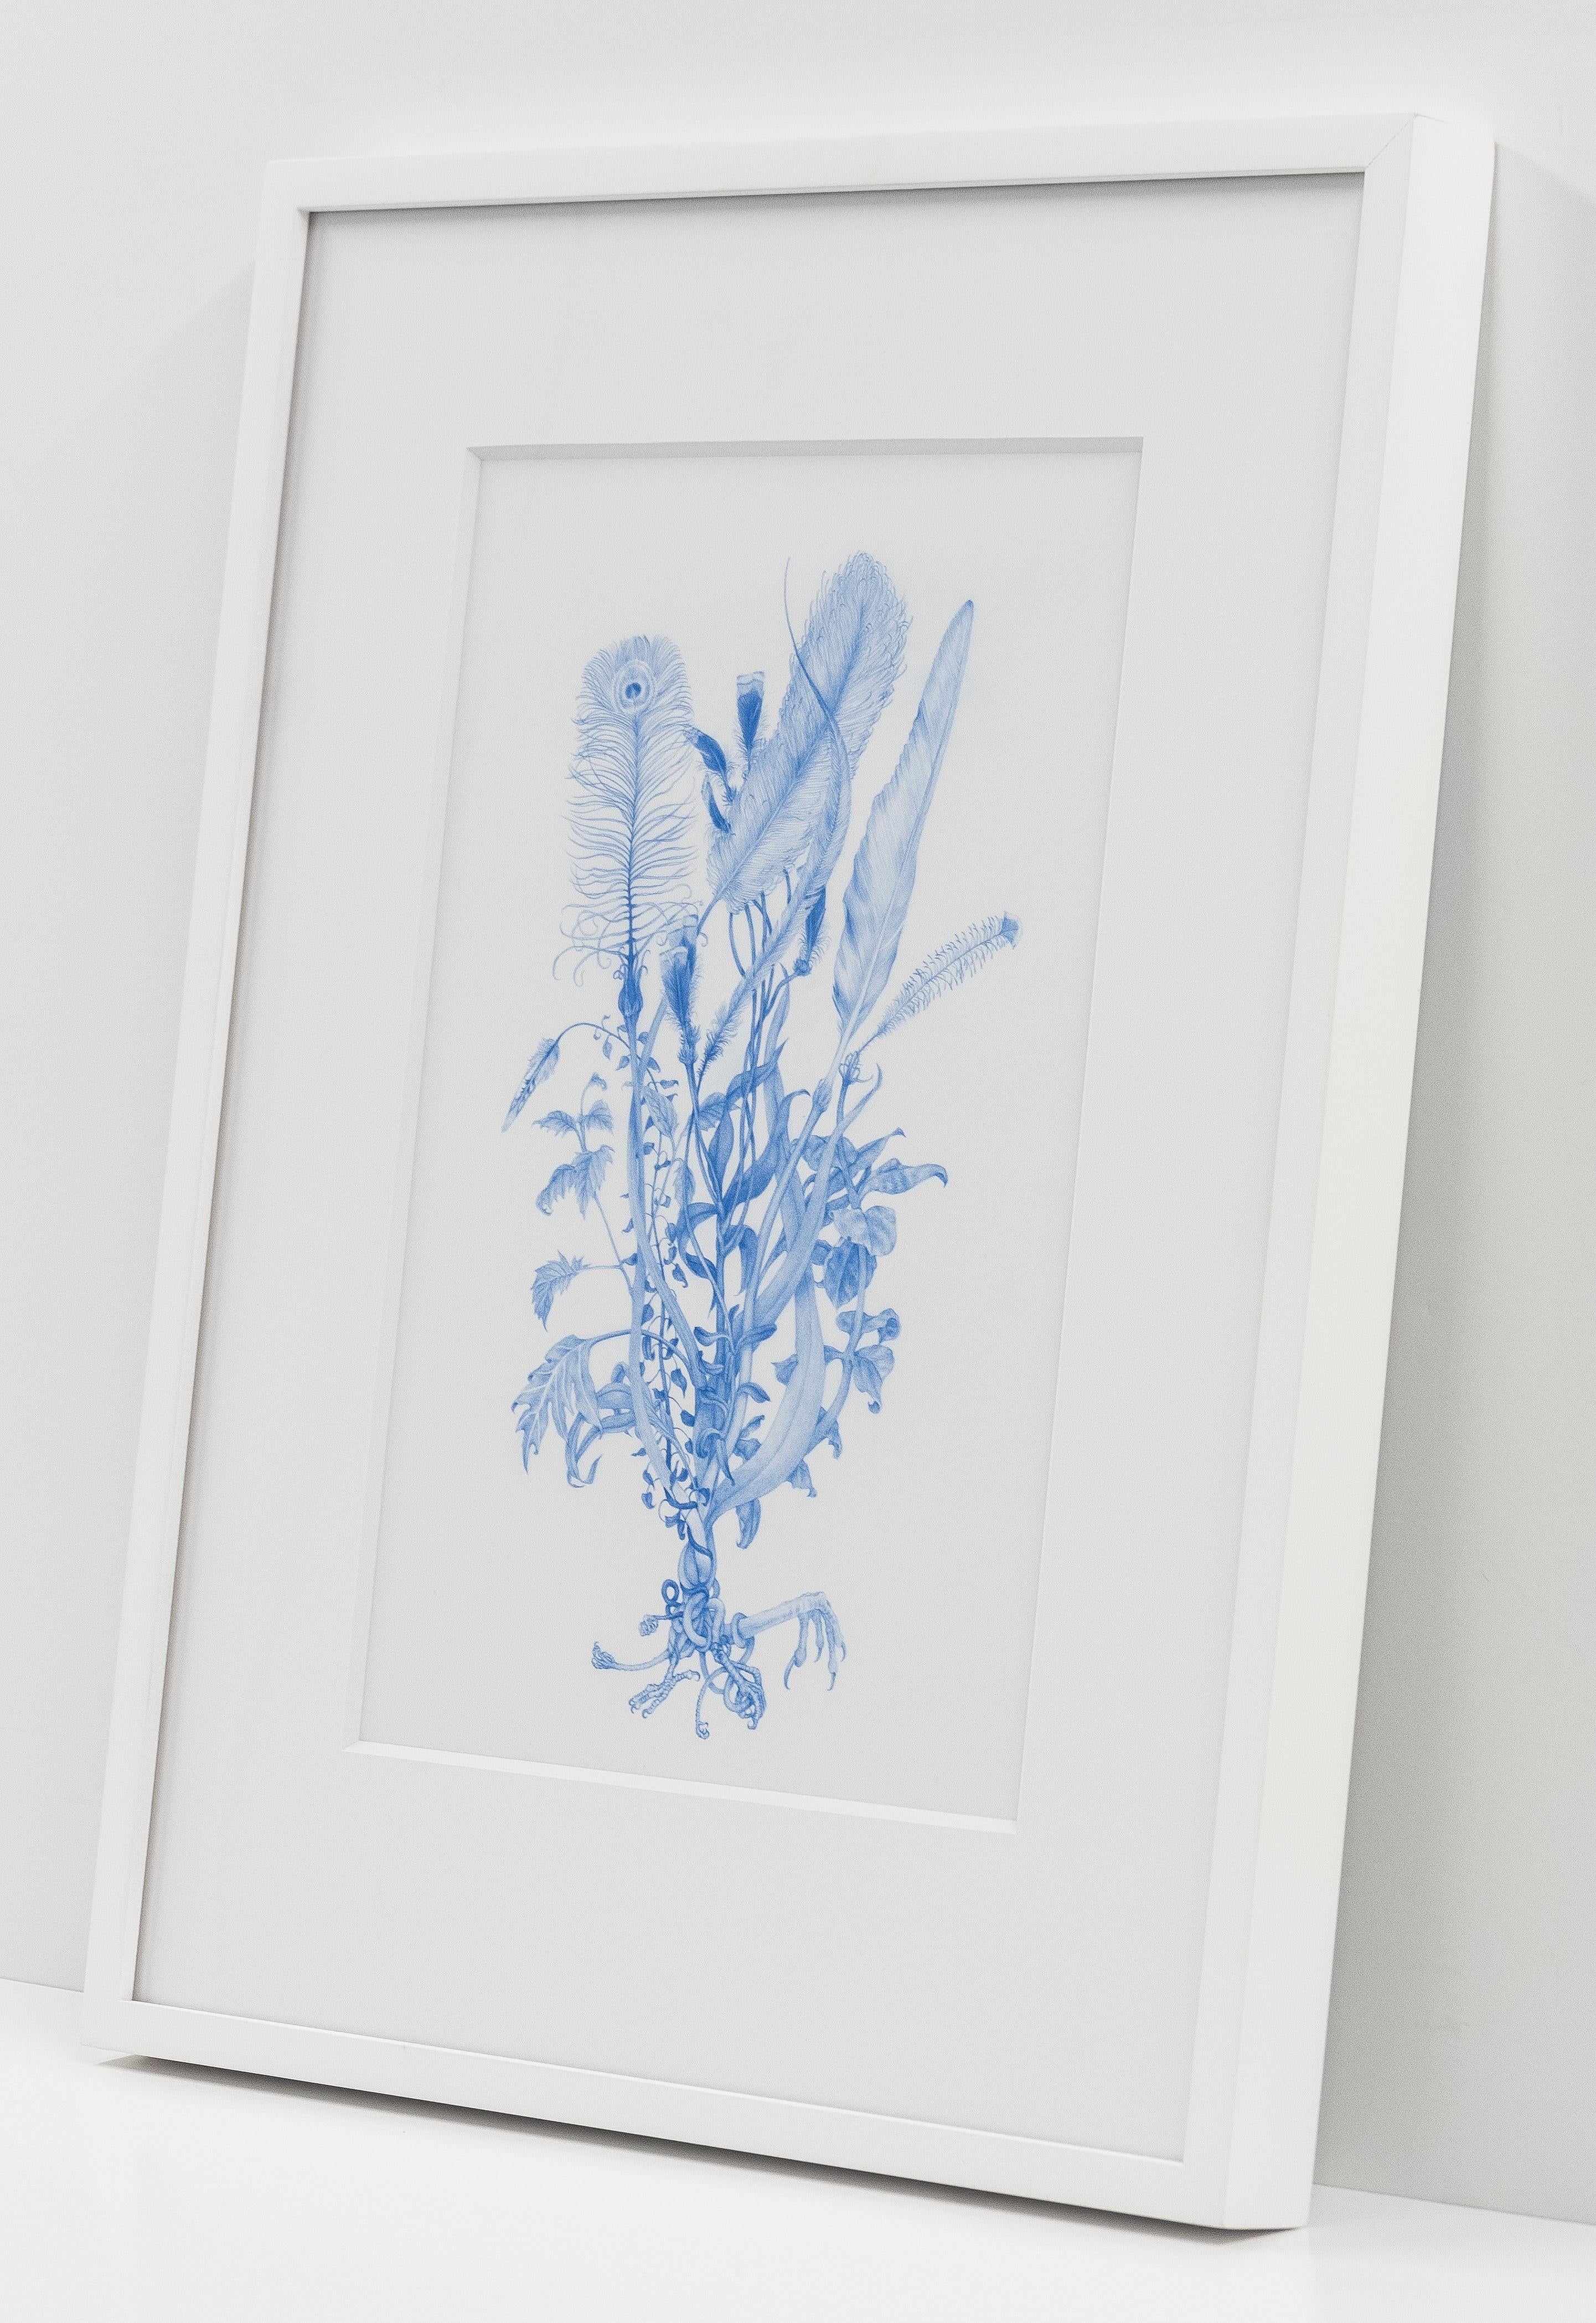 This is a drawing in blue color pencil on Mylar by Zachari Logan, depicting a bouquet of feathers.

Bouquet (Avian), from Enigmas
c. 2023

Accompanied by a certificate of authenticity

Colored pencil on Mylar

13 x 8.5 inches

Contact gallery for